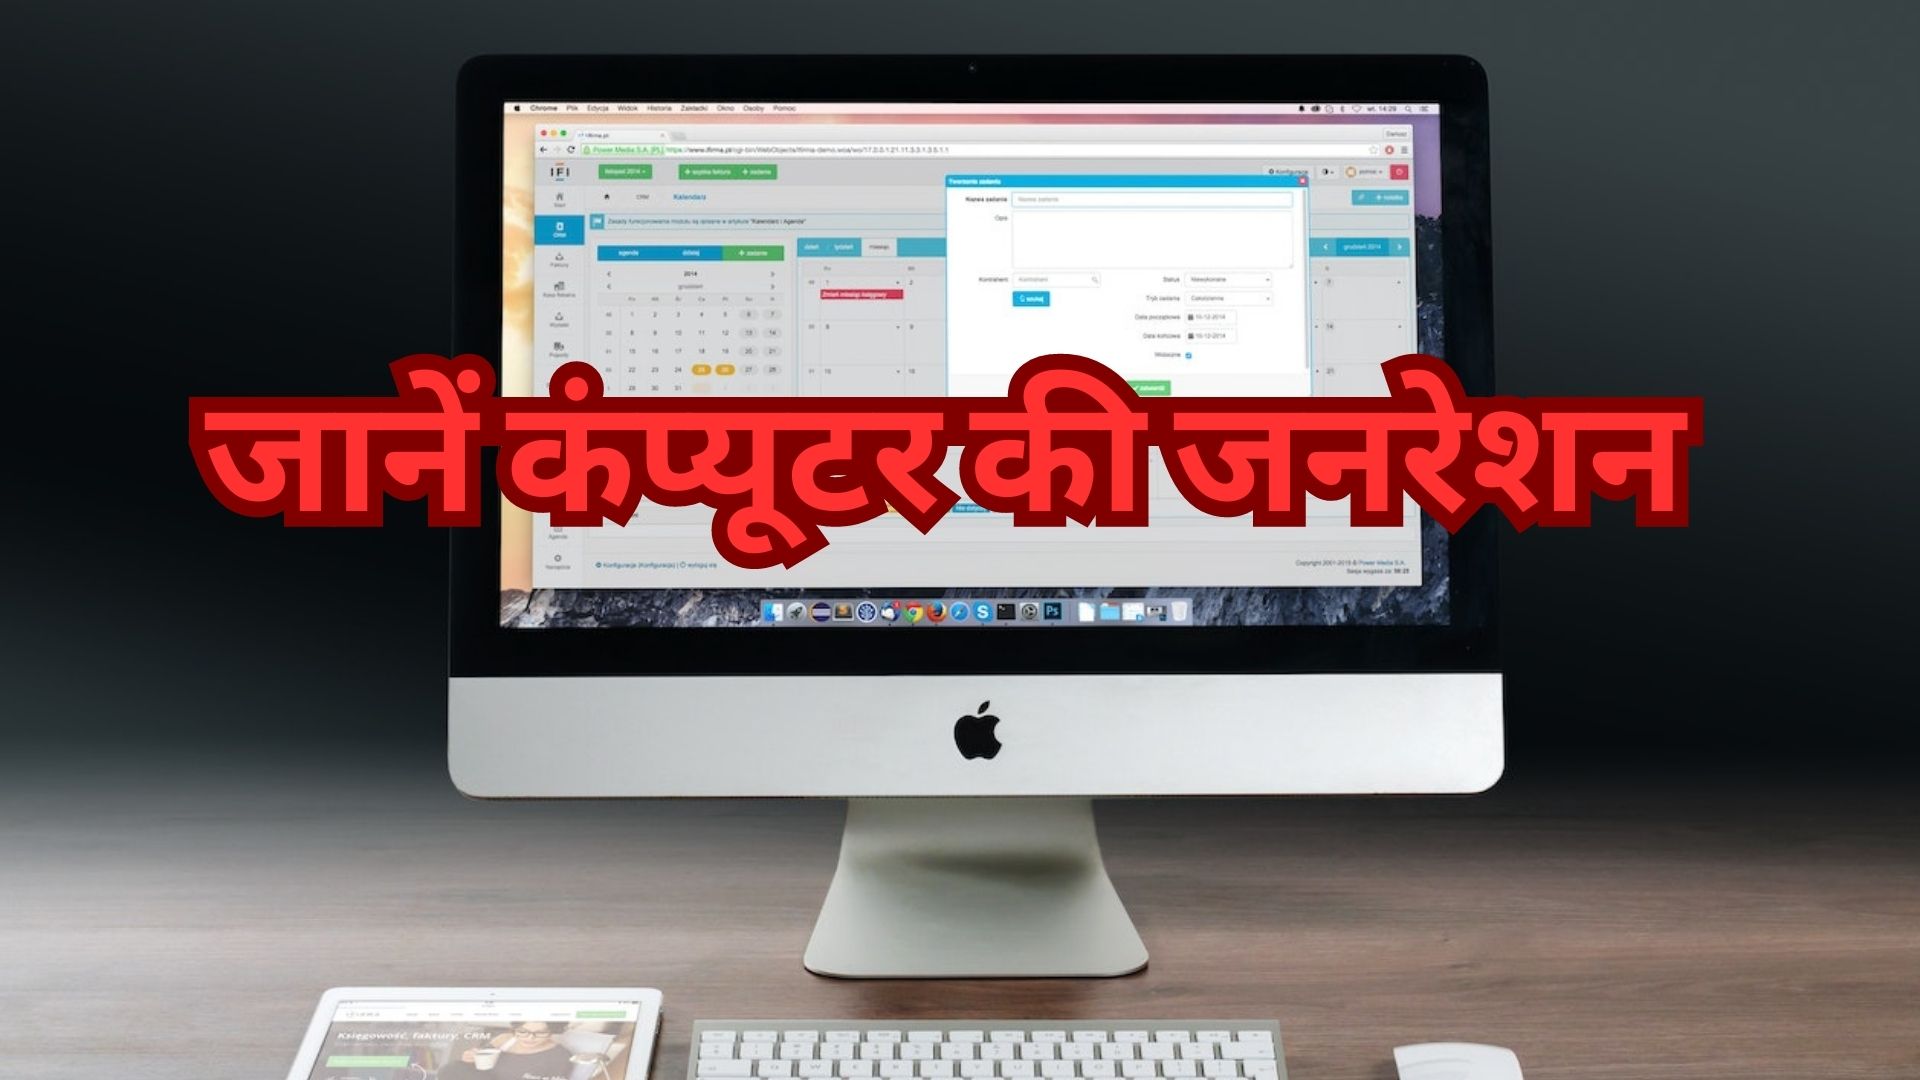 Generation of Computer in Hindi